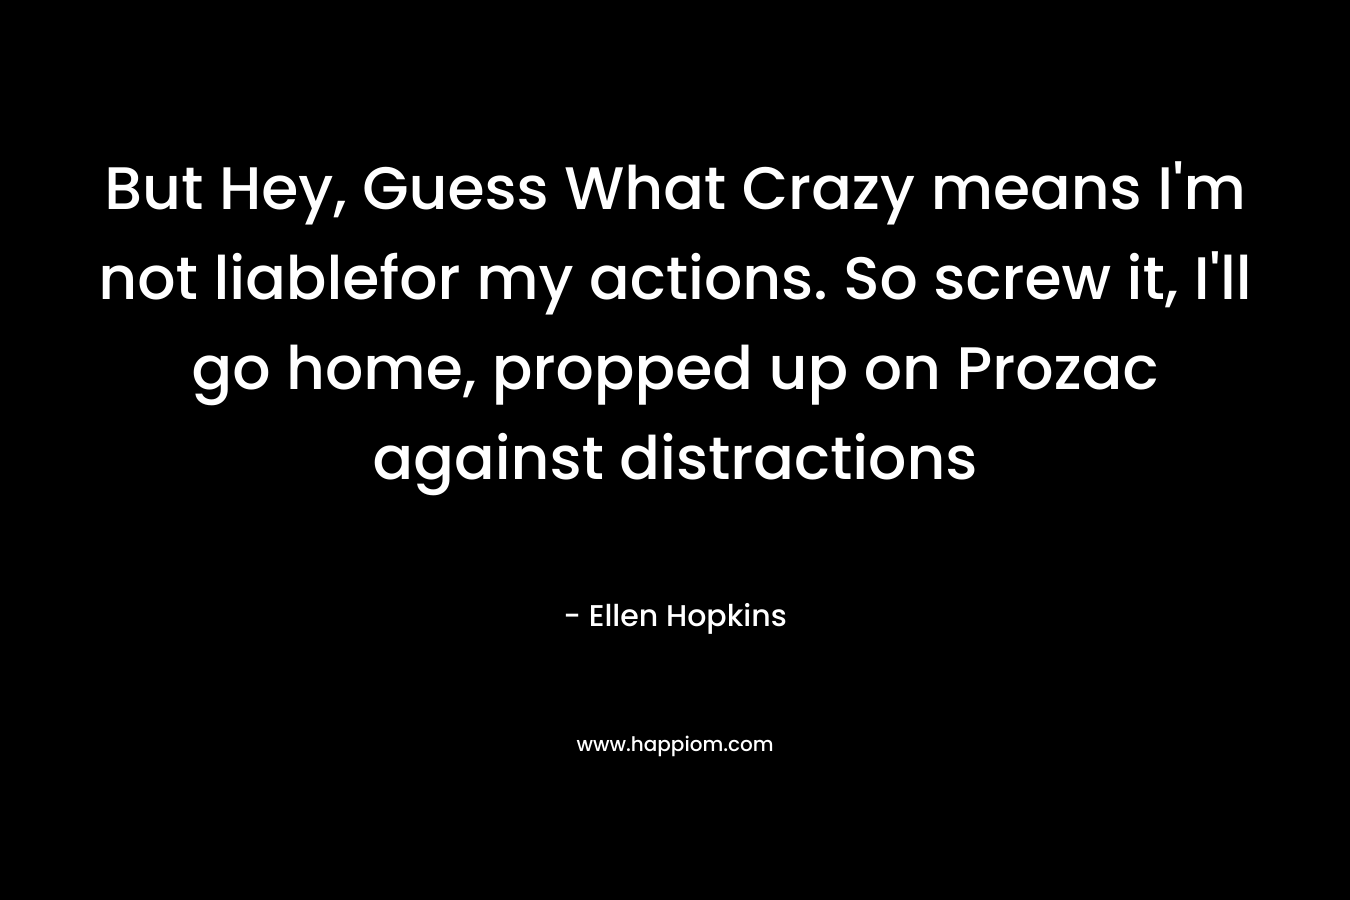 But Hey, Guess What Crazy means I’m not liablefor my actions. So screw it, I’ll go home, propped up on Prozac against distractions – Ellen Hopkins